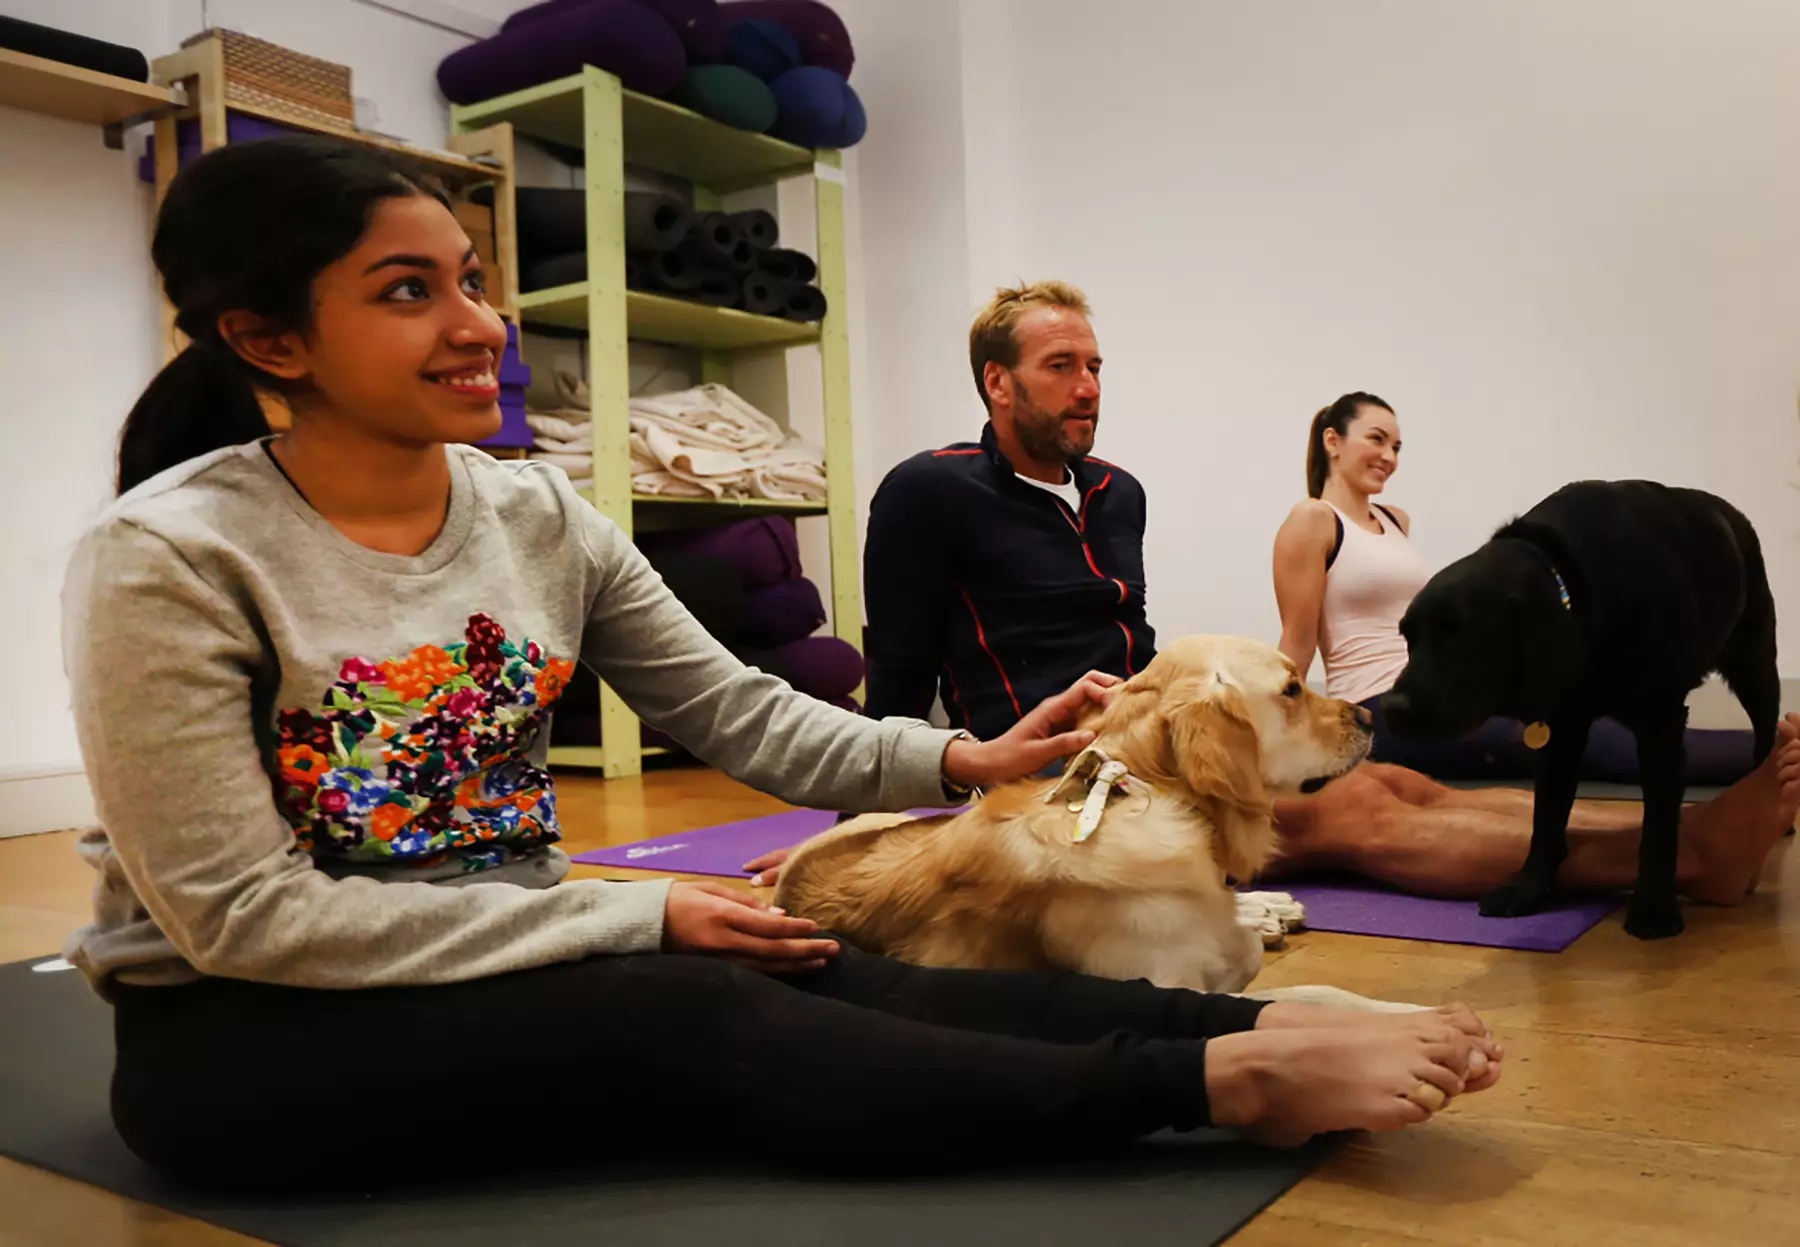 Viewers can catch Ben Fogle try combining his love of dogs and exercise with a spot of dog yoga - AKA 'doga' - alongside his adorable labrador Storm (